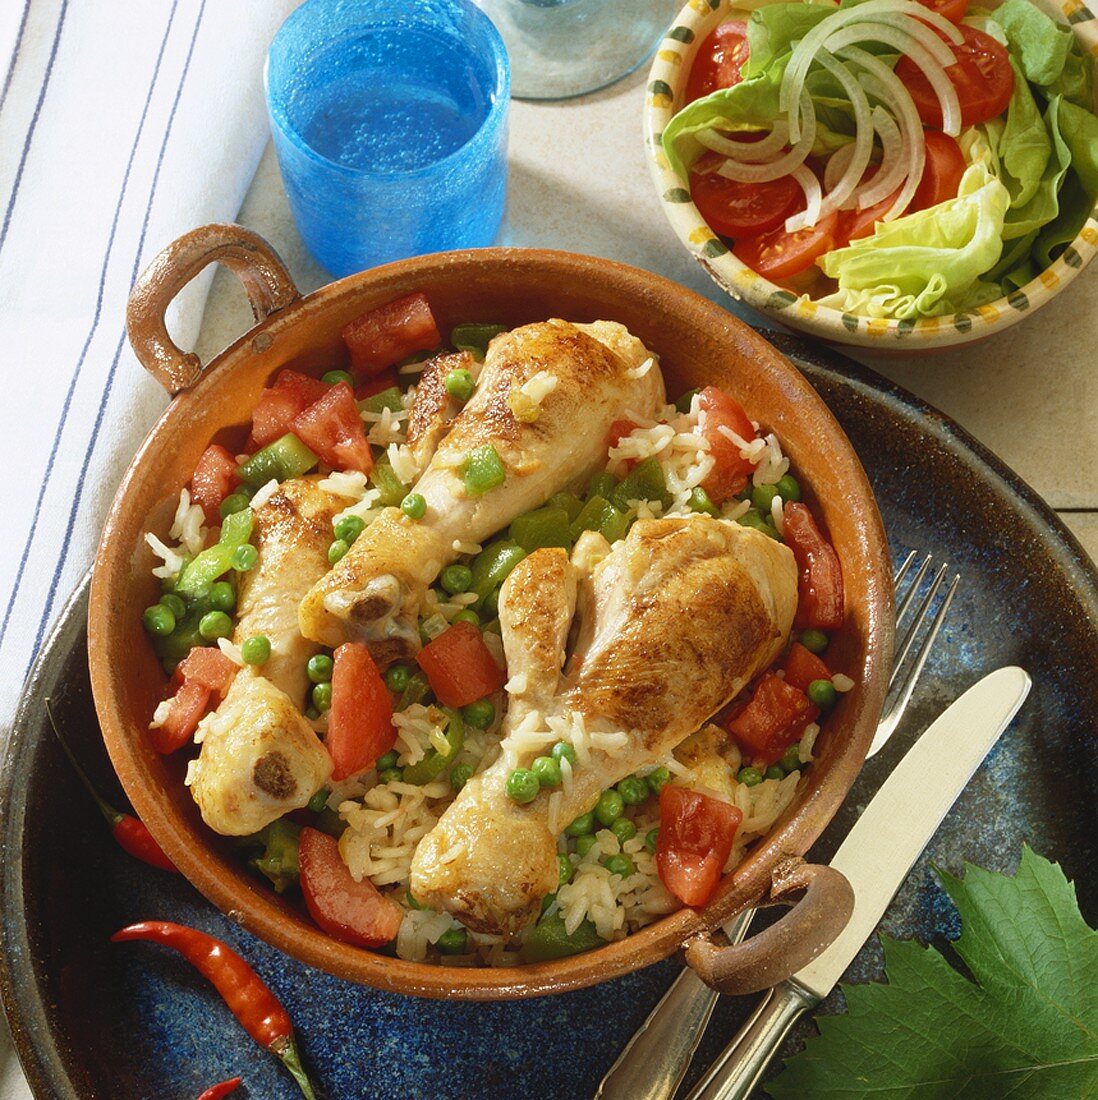 Braised chicken legs with vegetable rice